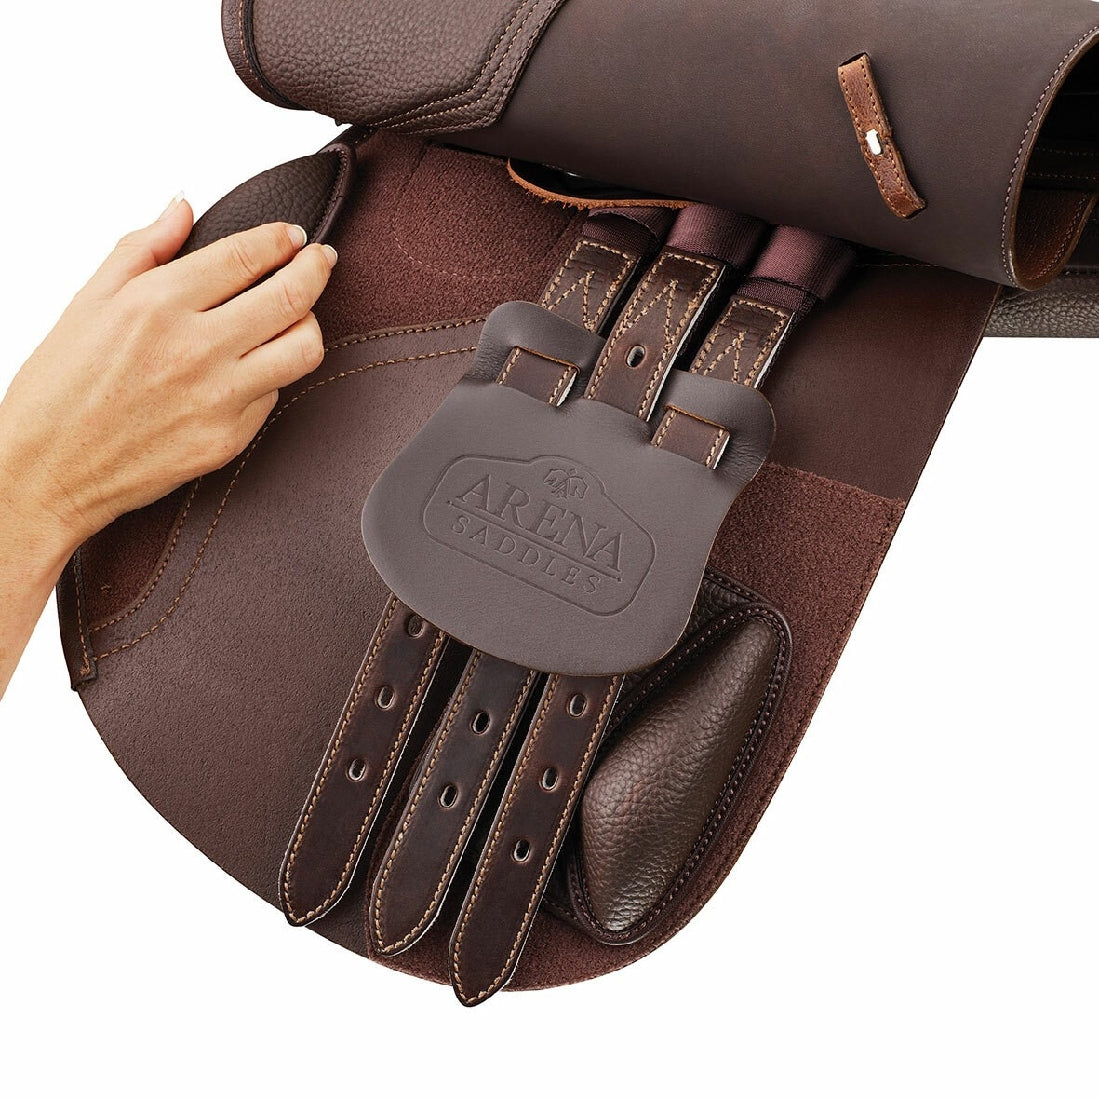 Hand holding Arena Saddles brown leather equestrian saddle detail.